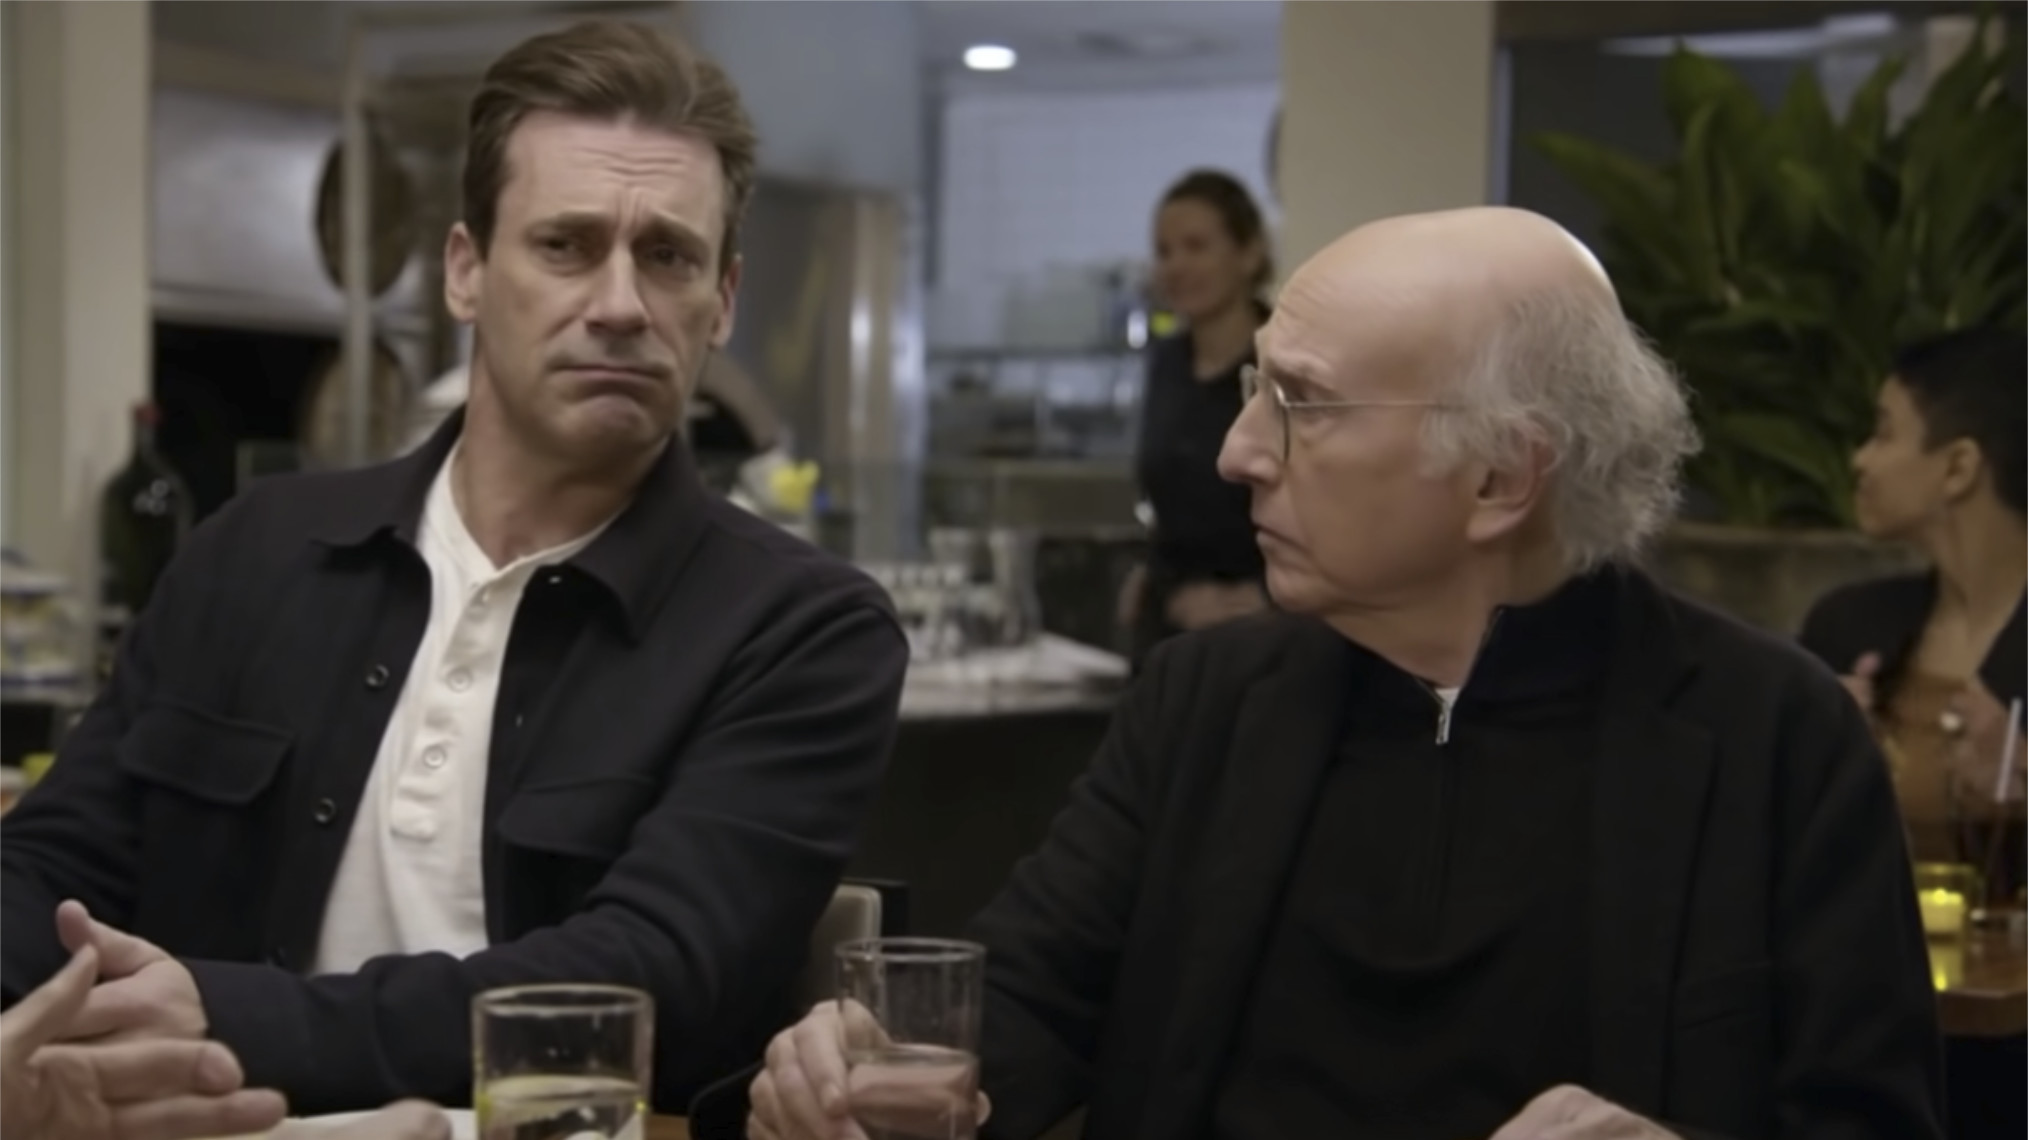 Dodge Min Interesse 15 Stars Who Played Themselves on 'Curb Your Enthusiasm' (VIDEO)